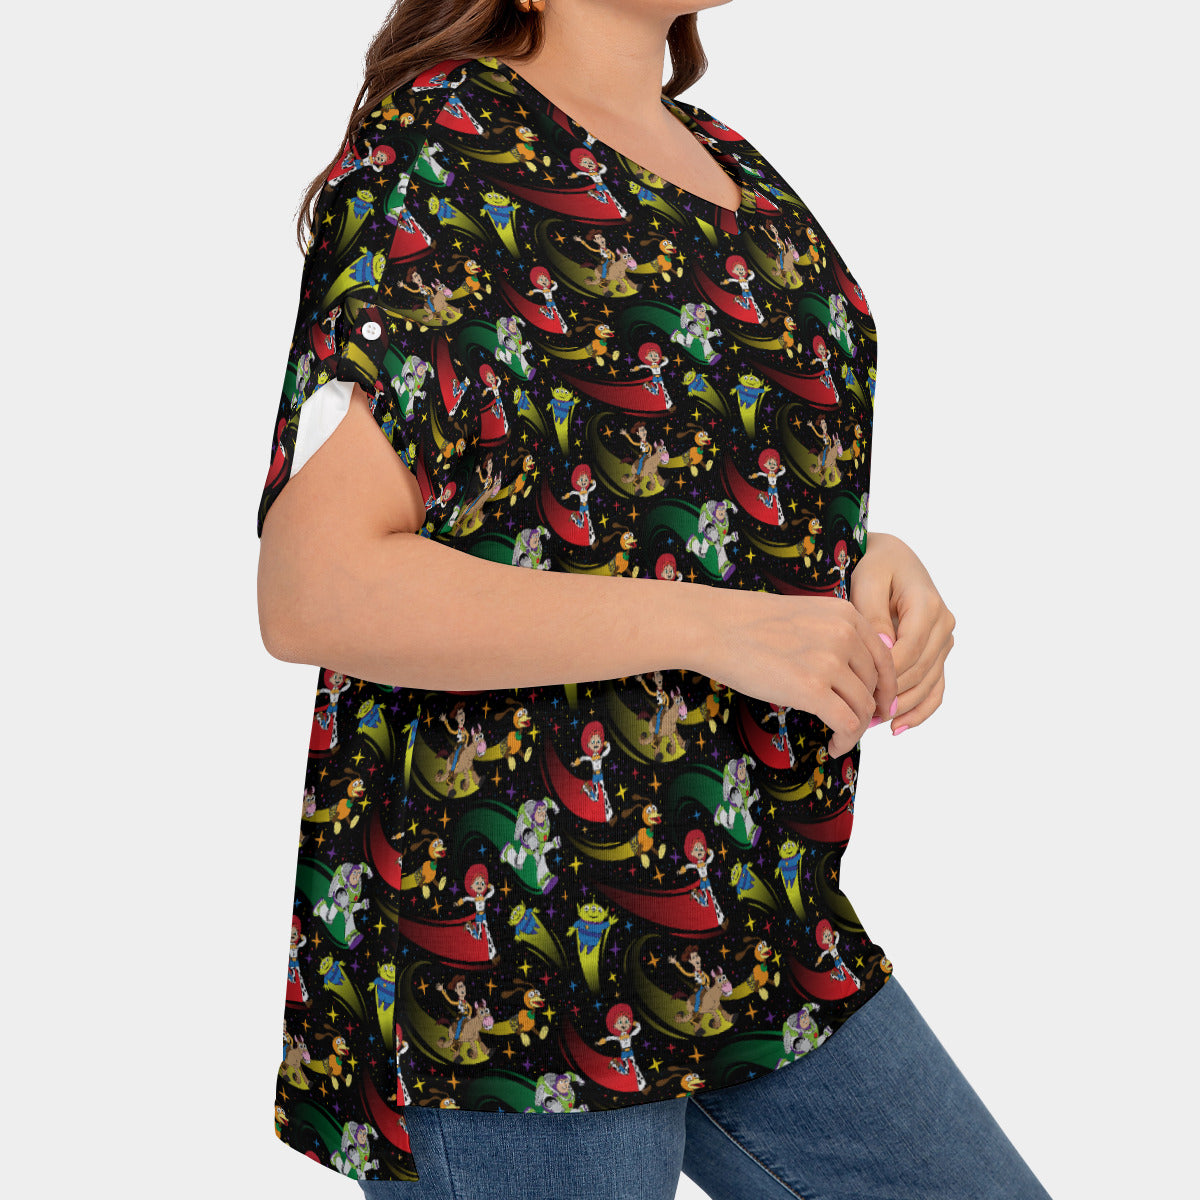 Roundup Friends Women's Plus Size Short Sleeve T-shirt With Sleeve Loops